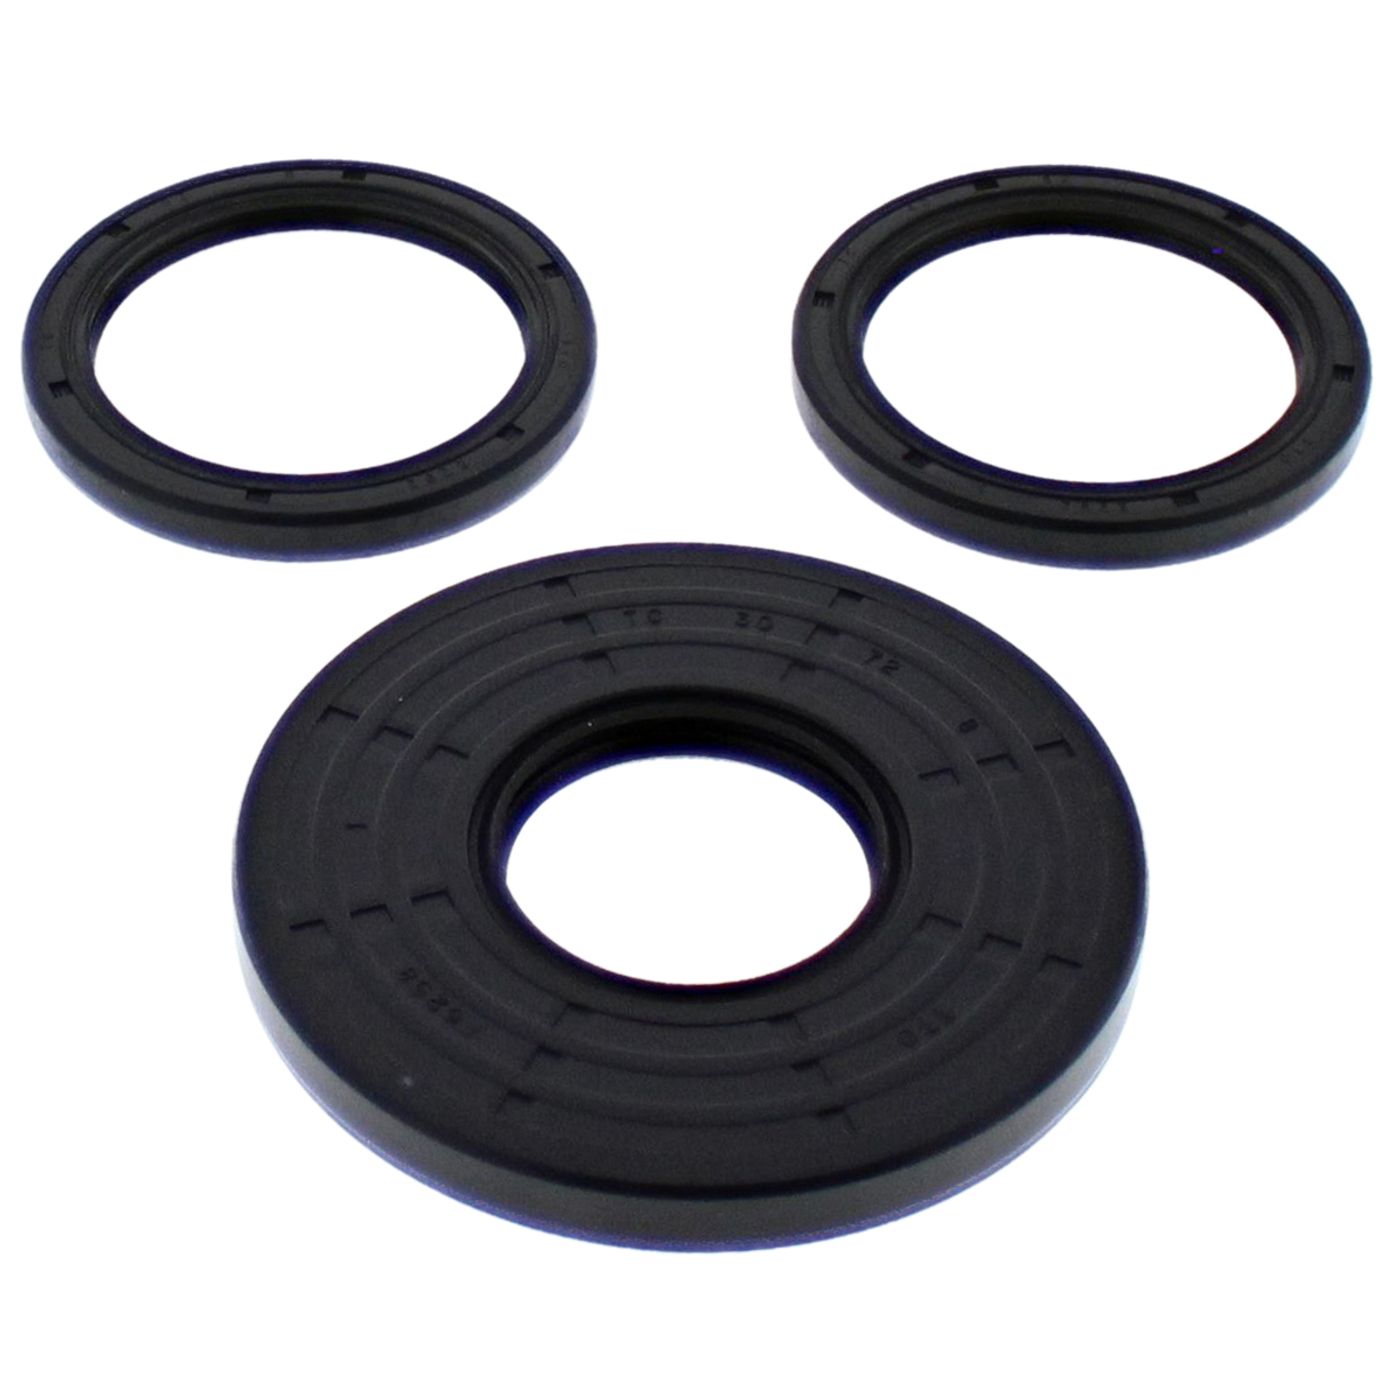 Wrp Diff Seal Kits - WRP252115-5 image